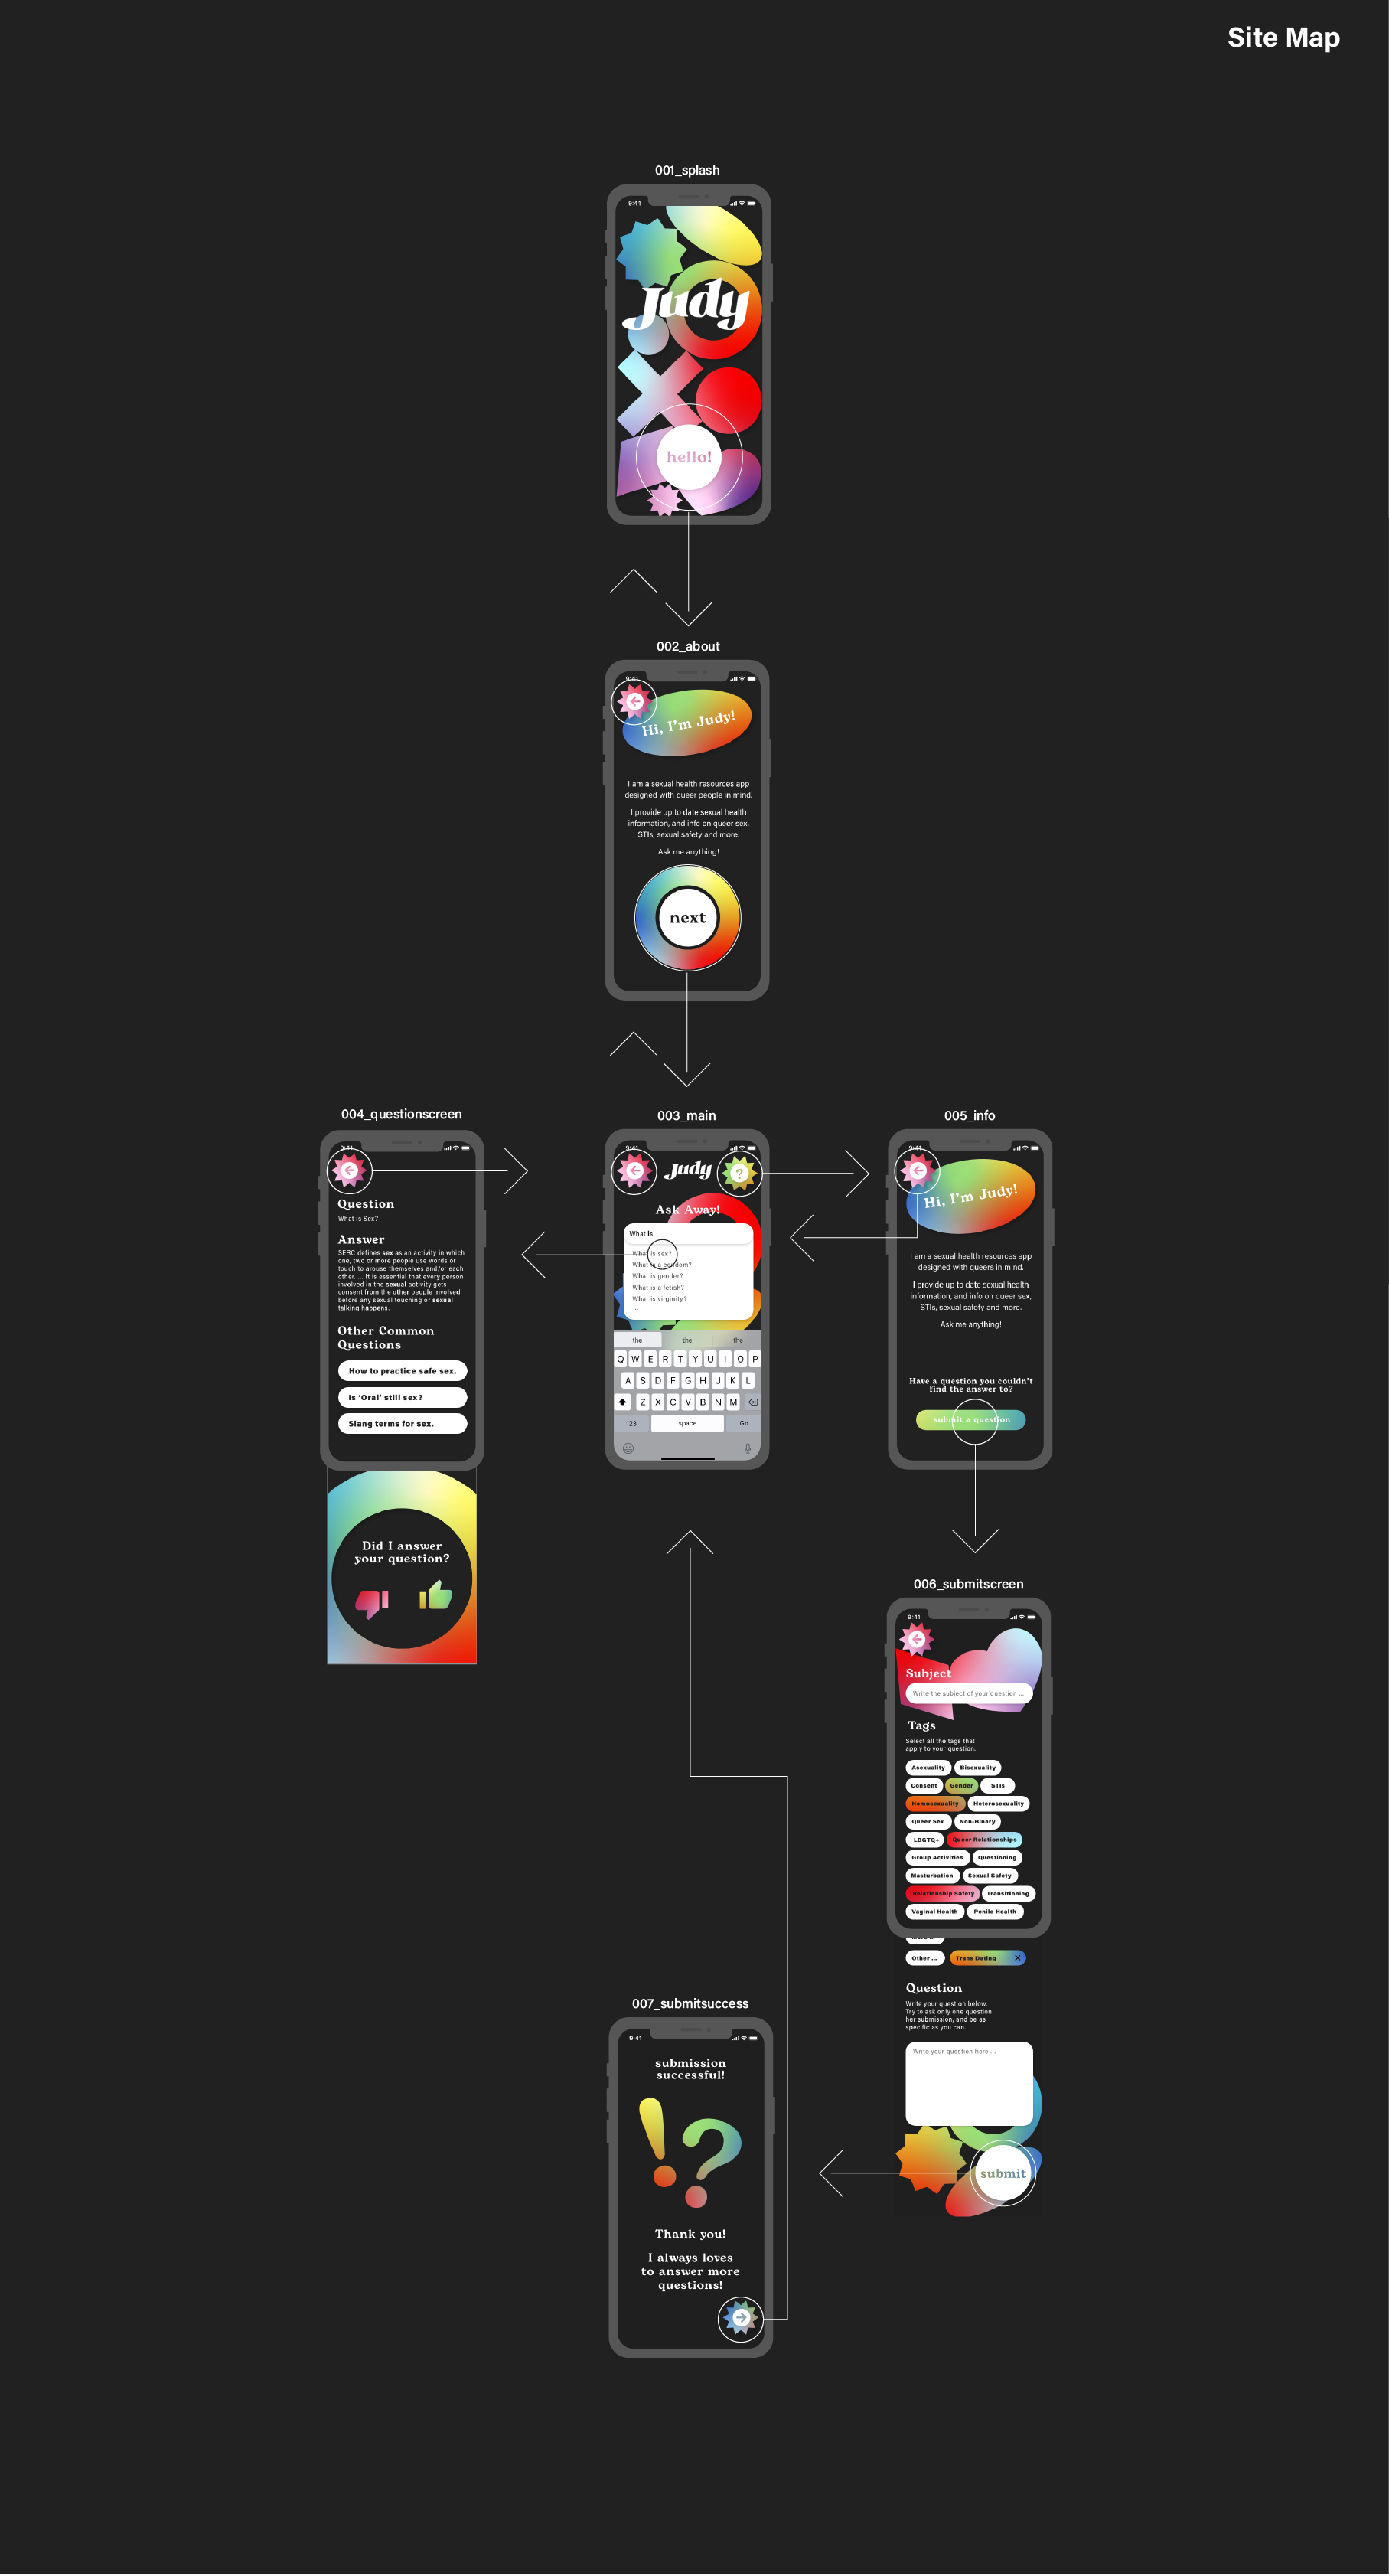 A site map explaining how to navigate the Judy app